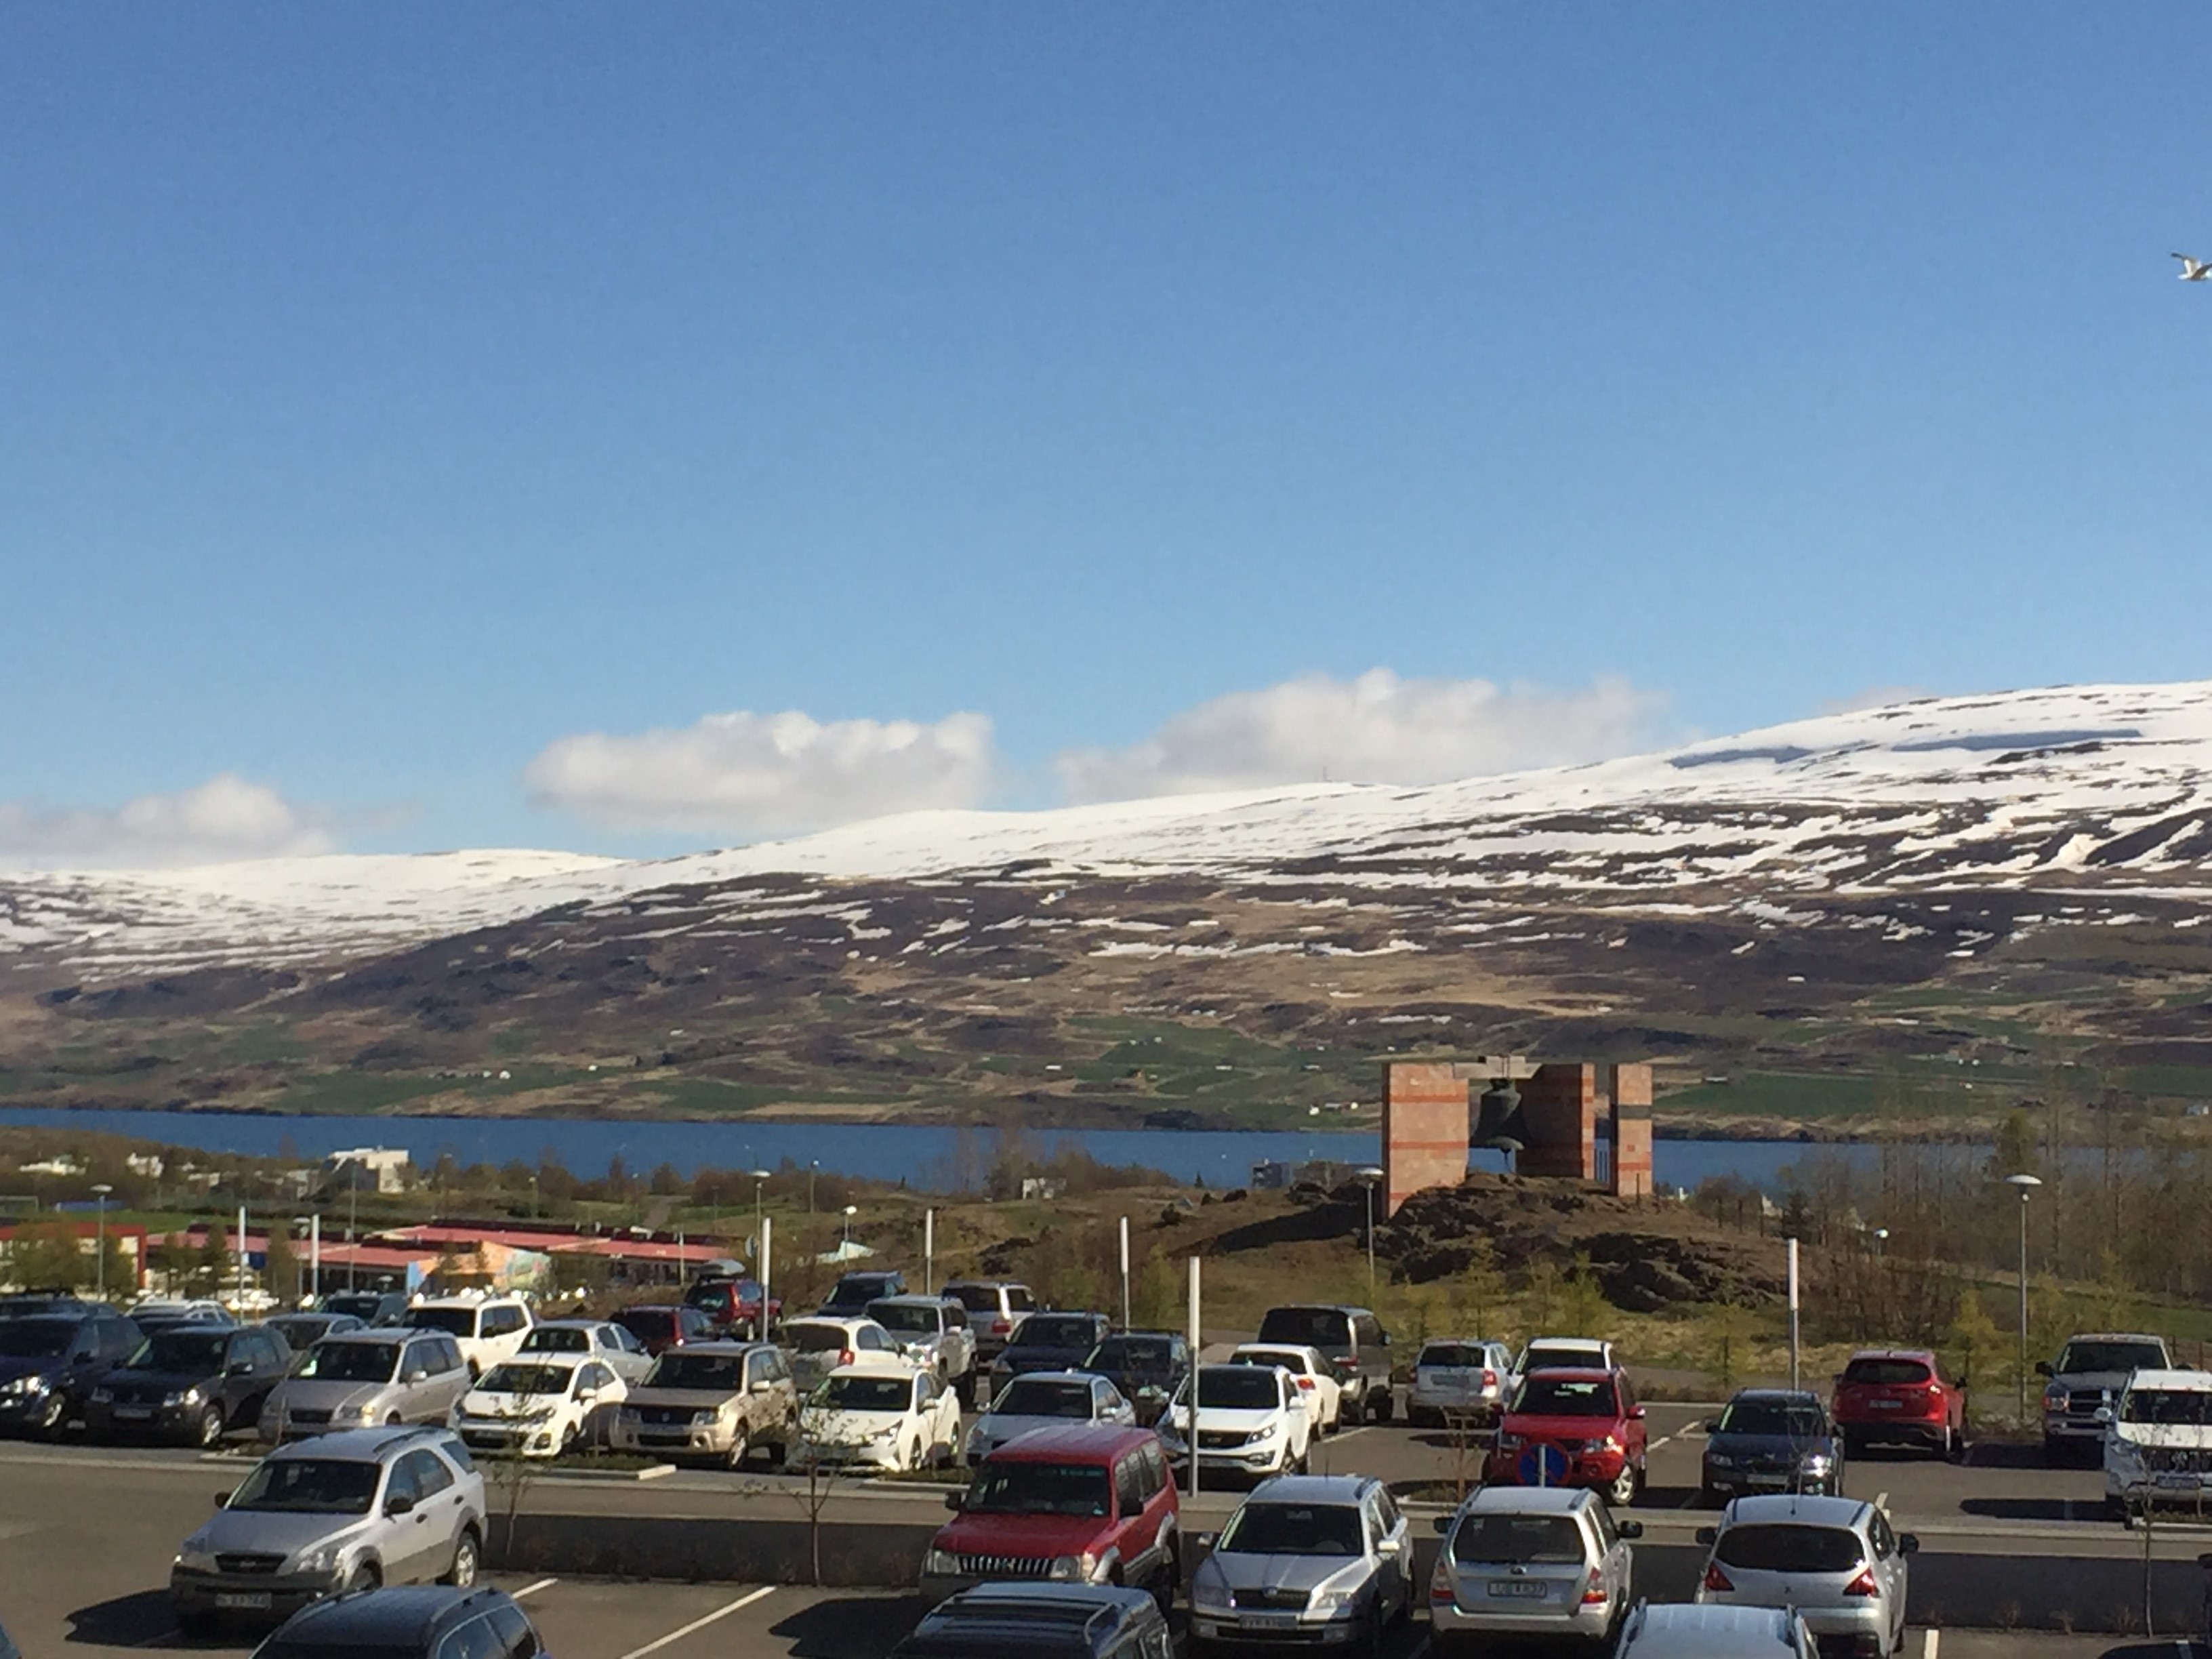 The view from the conference window, University of Akureyri